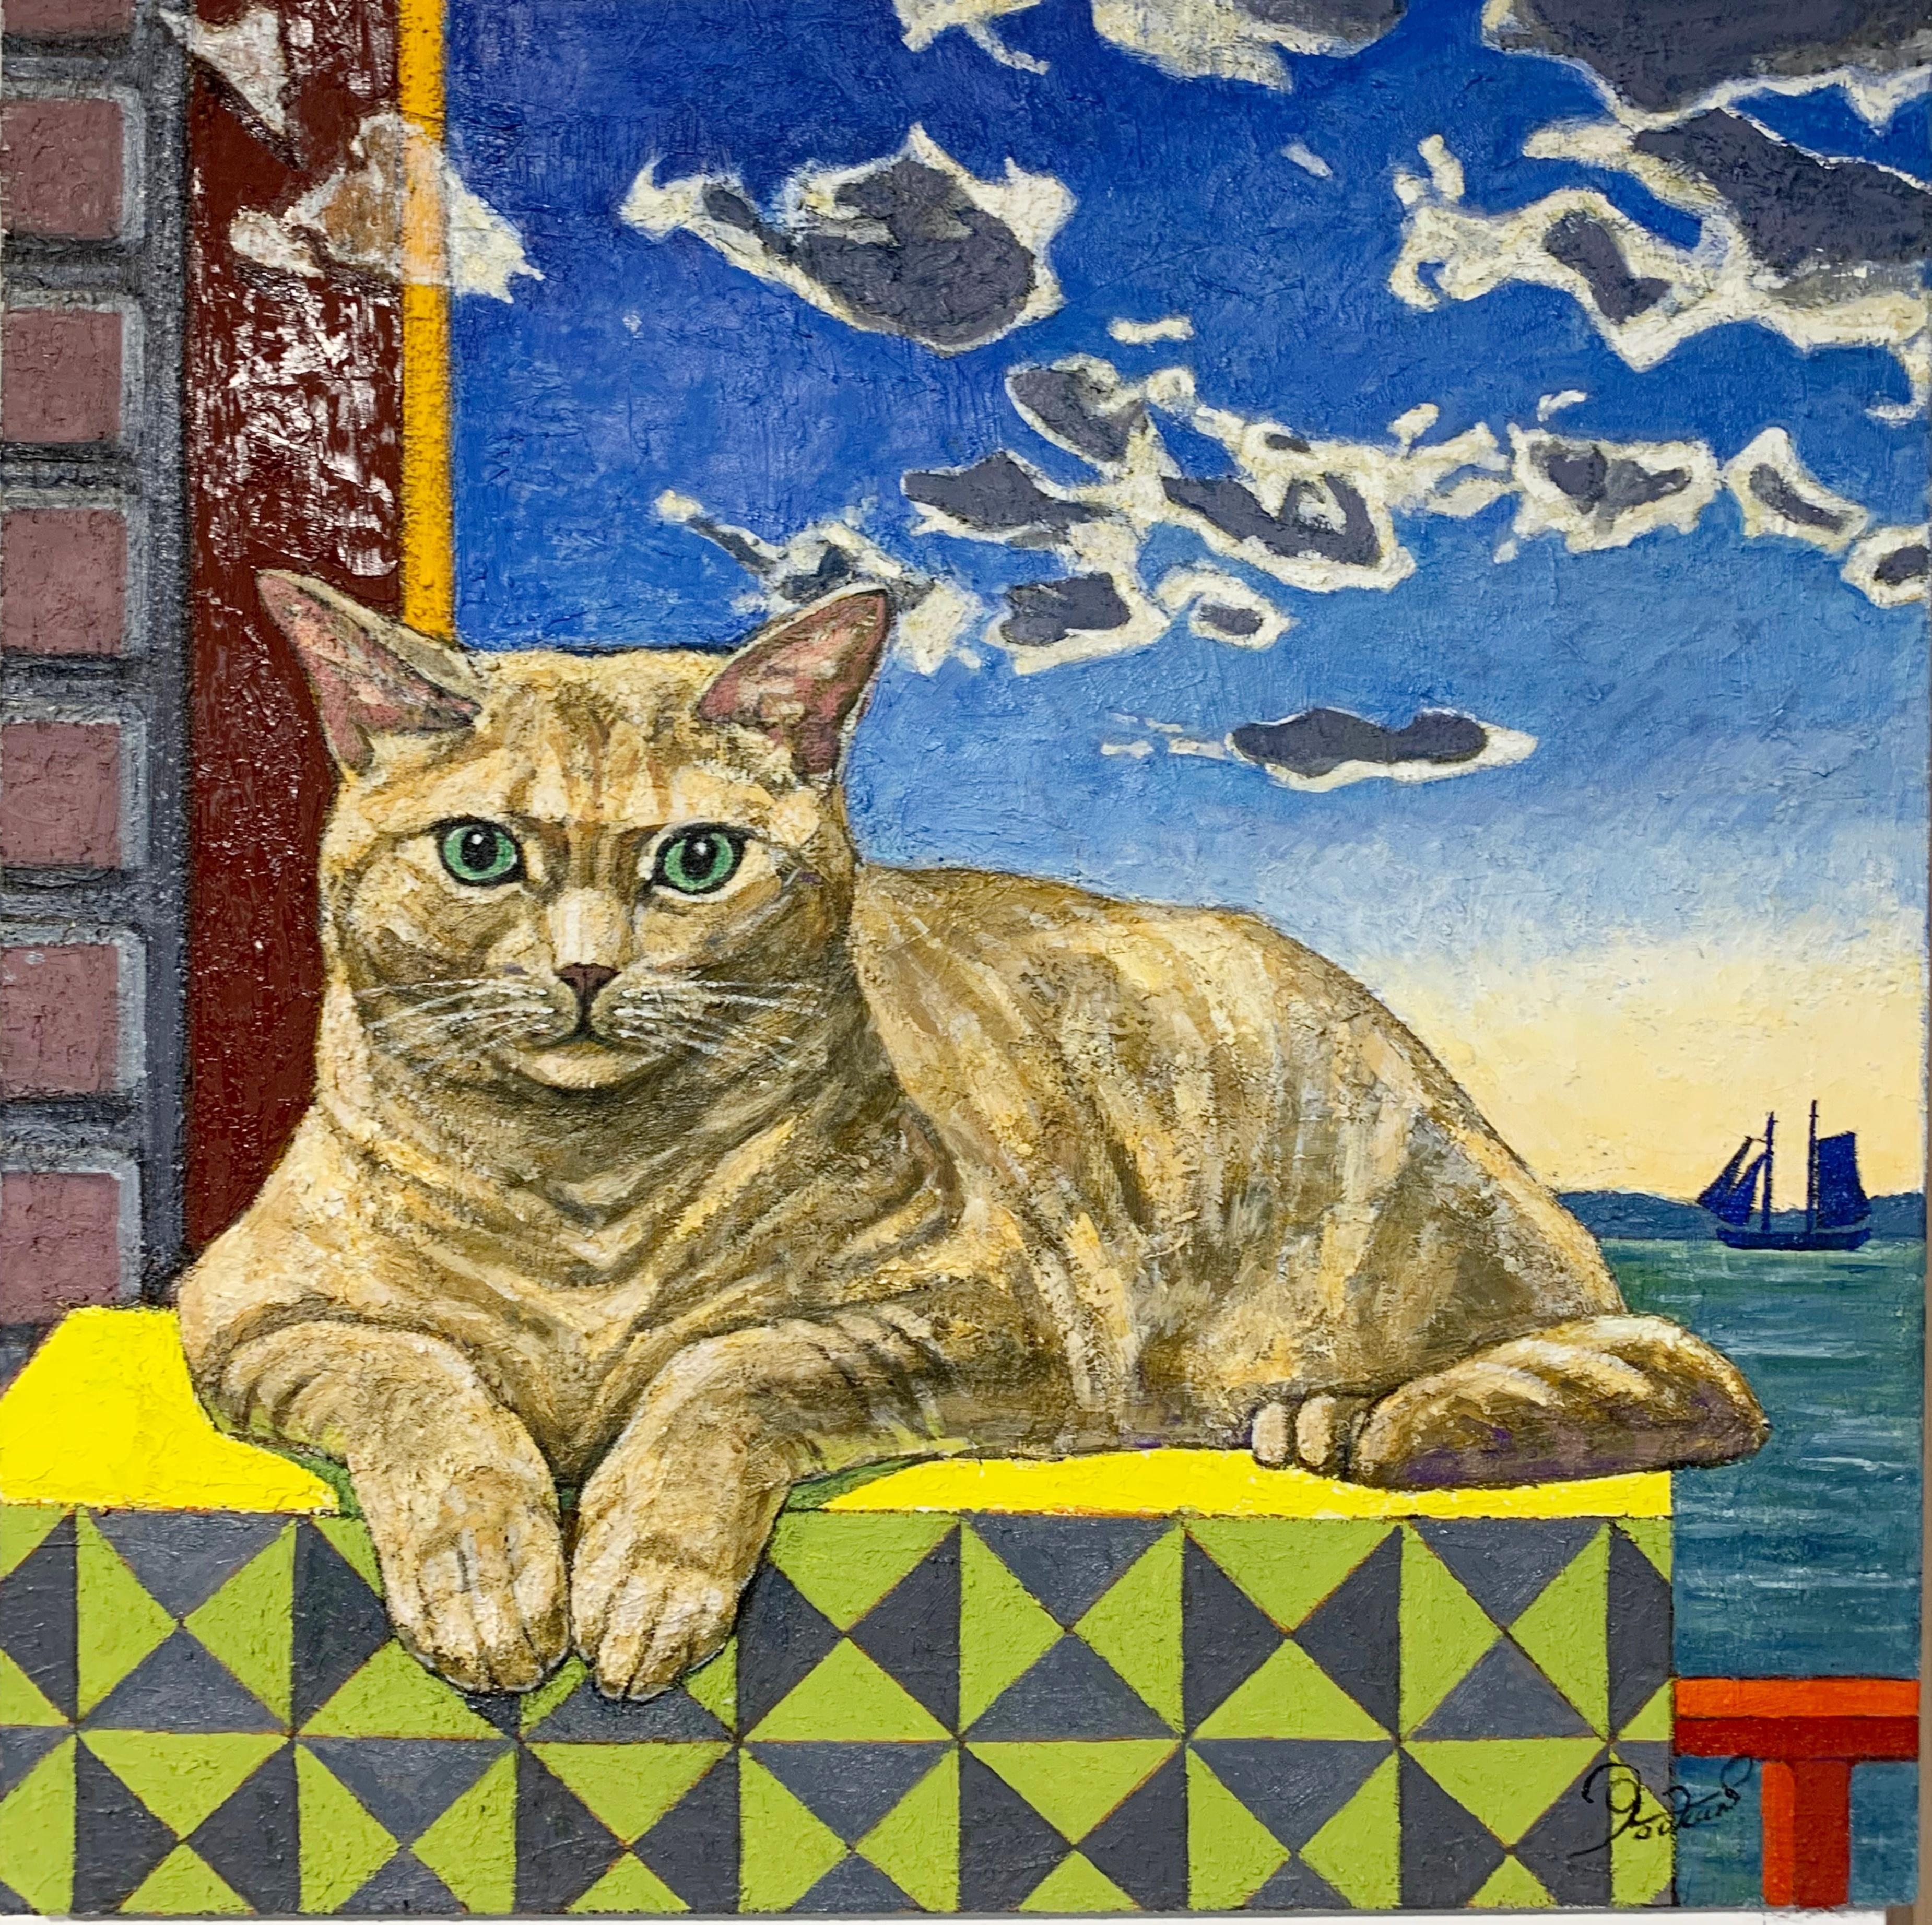 Orange Cat's Thoughts (original painting by renowned cat painter)